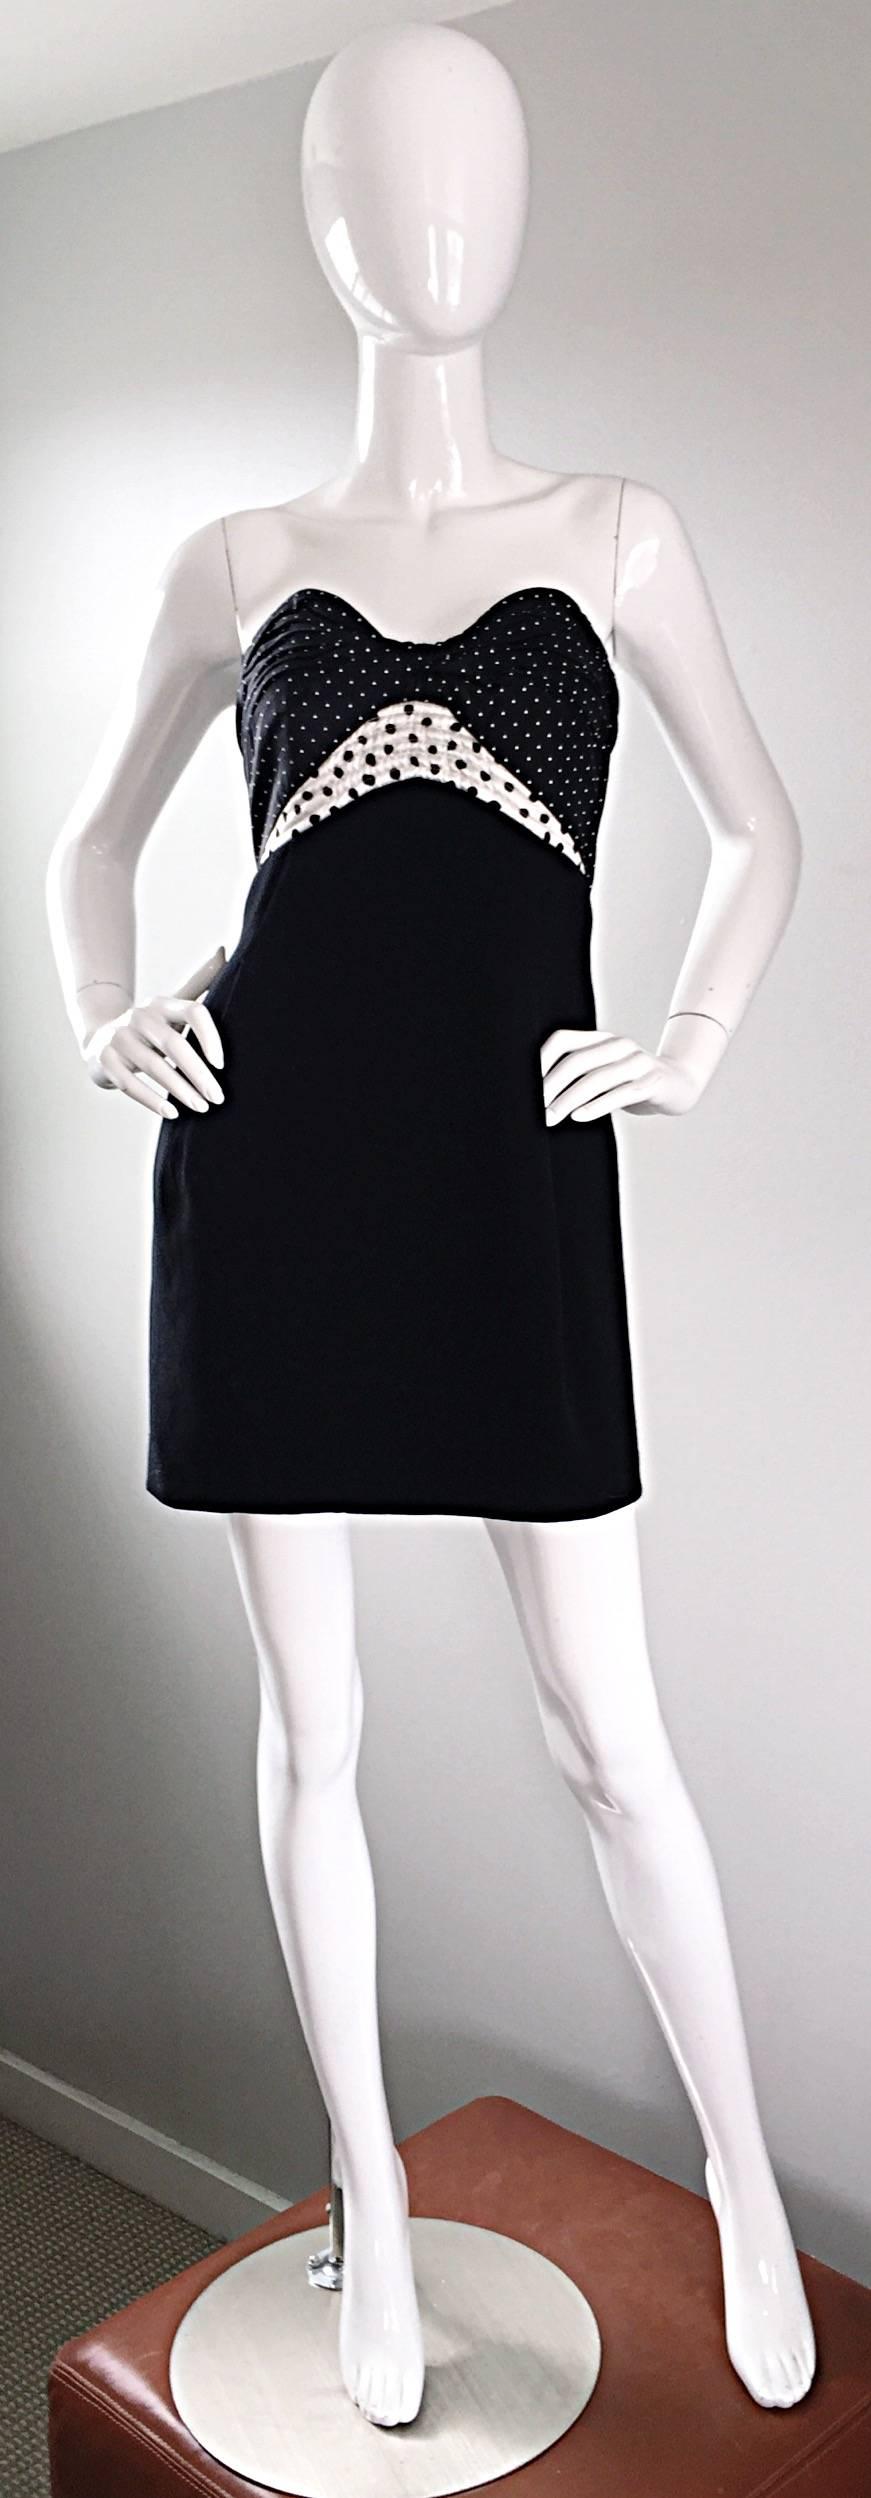 Exquisite vintage GEOFFREY BEENE early 90s strapless dress! Features a black and white silk polka dotted bodice, and a flattering lightweight black wool skirt. Impeccable construction, with the heavy eye to detail that Beene was renowned for. Skirt